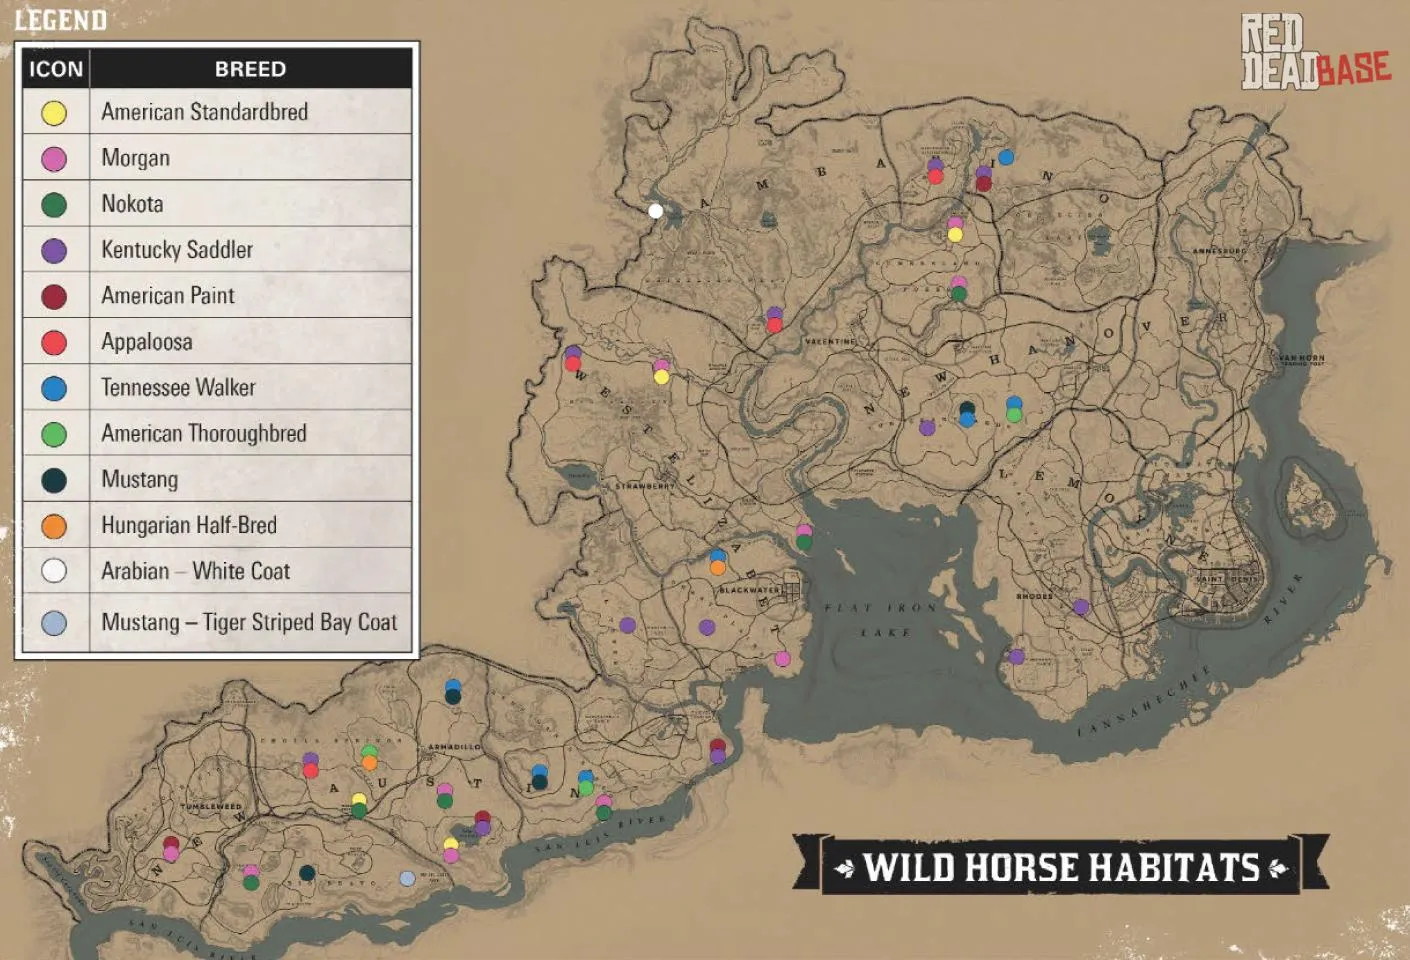 Tennessee Walker - Map Location in RDR2